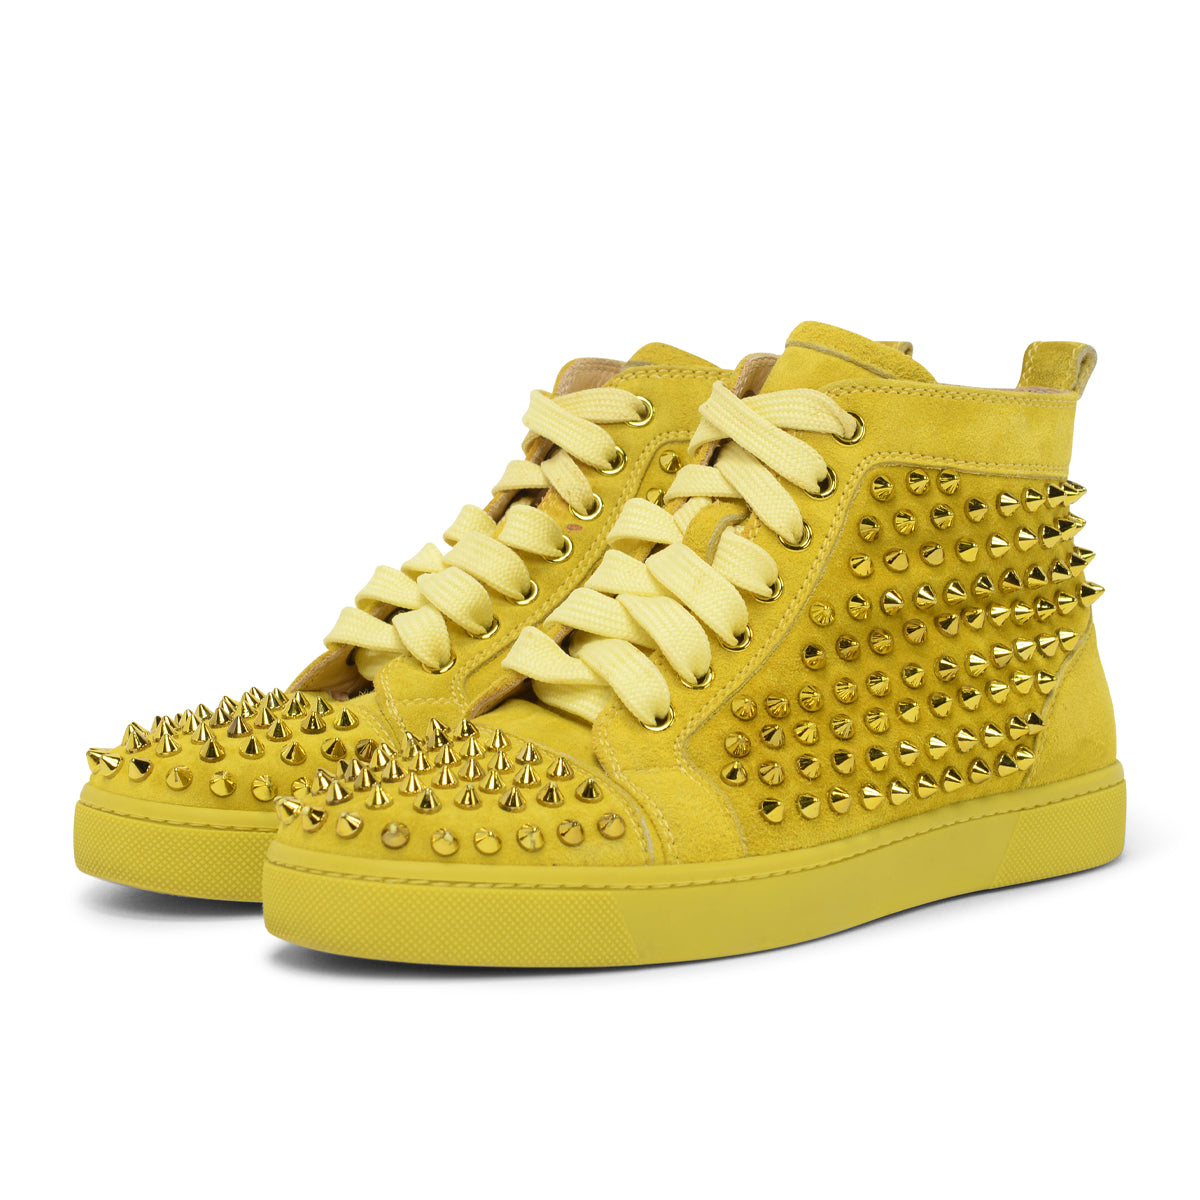 Christian Louboutin Multicolor Suede Louis Spikes High-Top